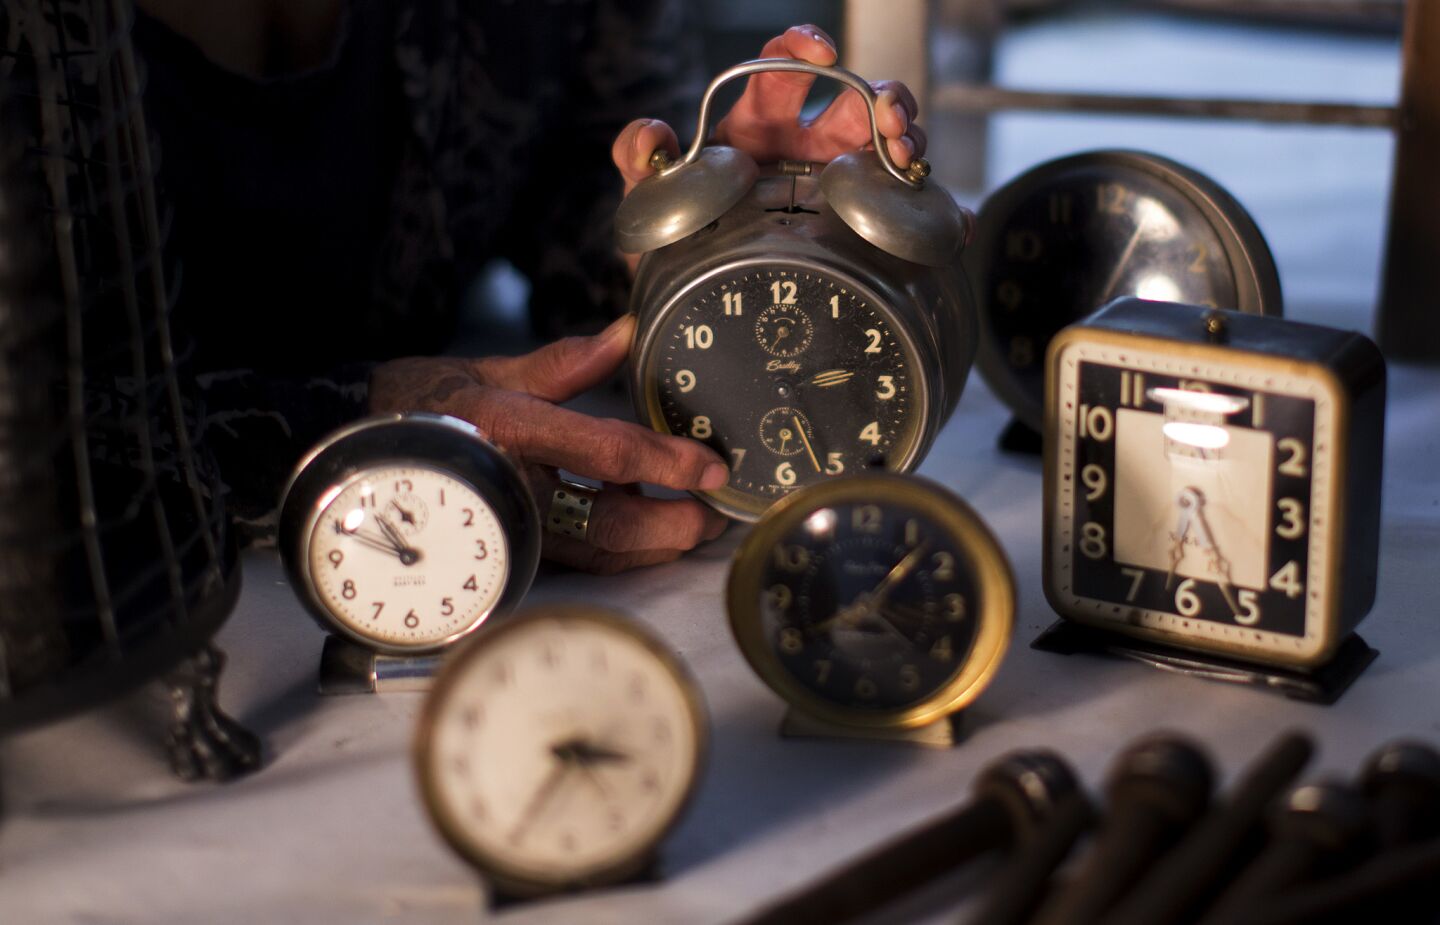 Vintage clocks of all shapes and sizes can be found in Betye Saar's Laurel Canyon studio.